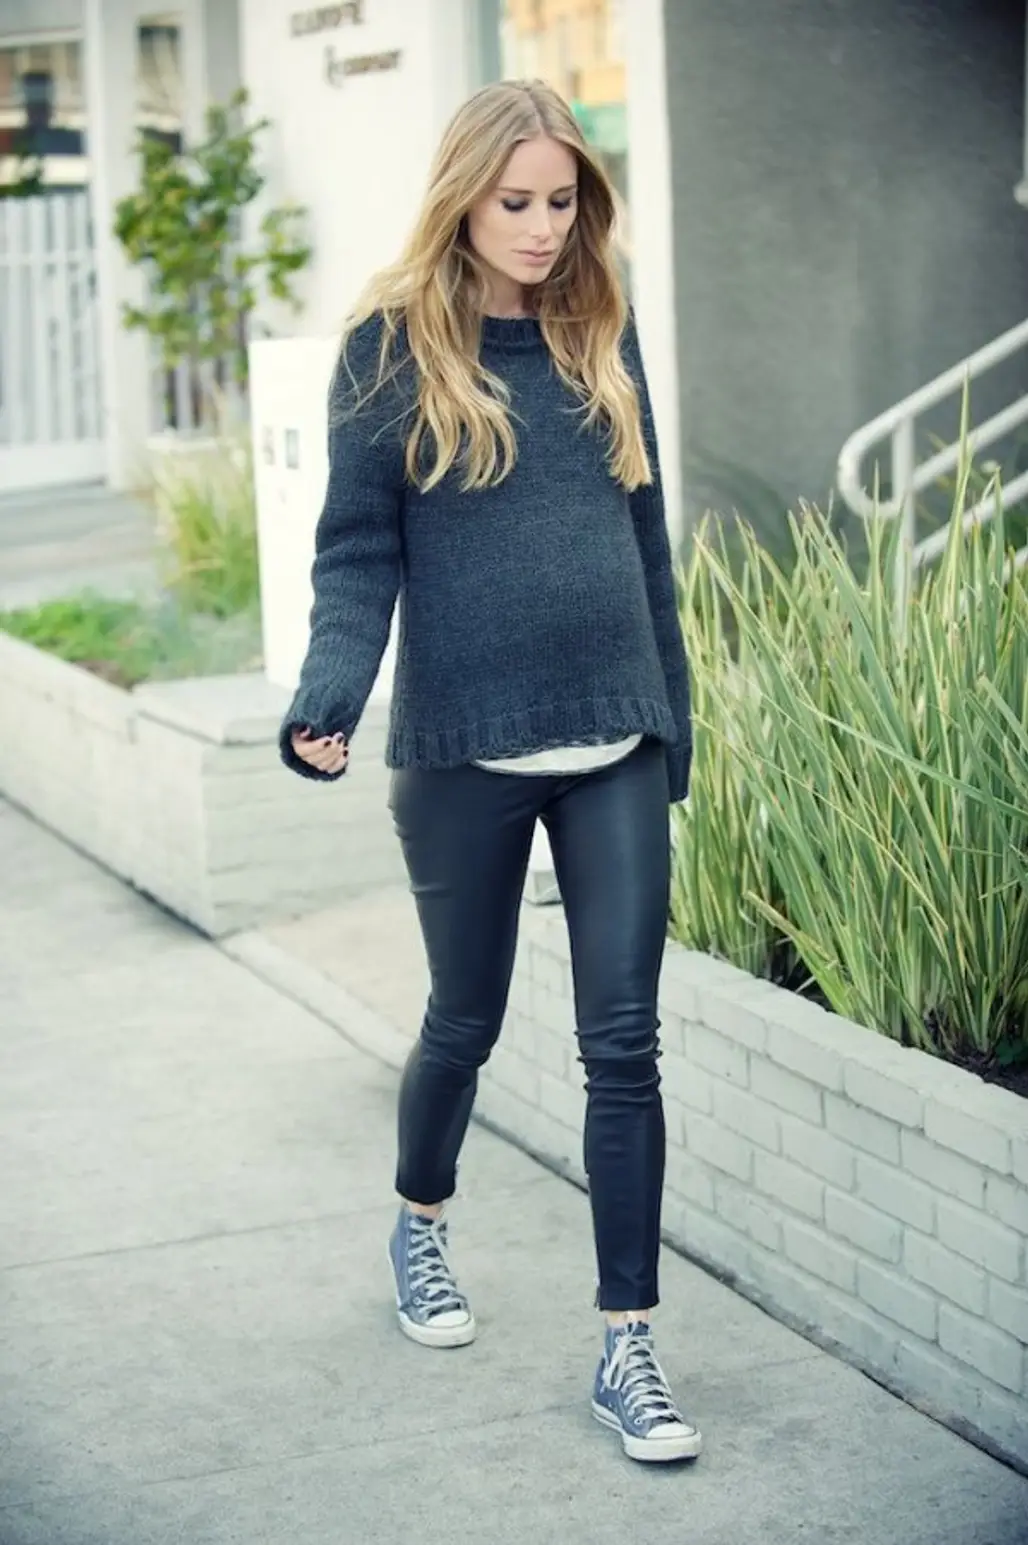 Leather Pants and Knit Sweater